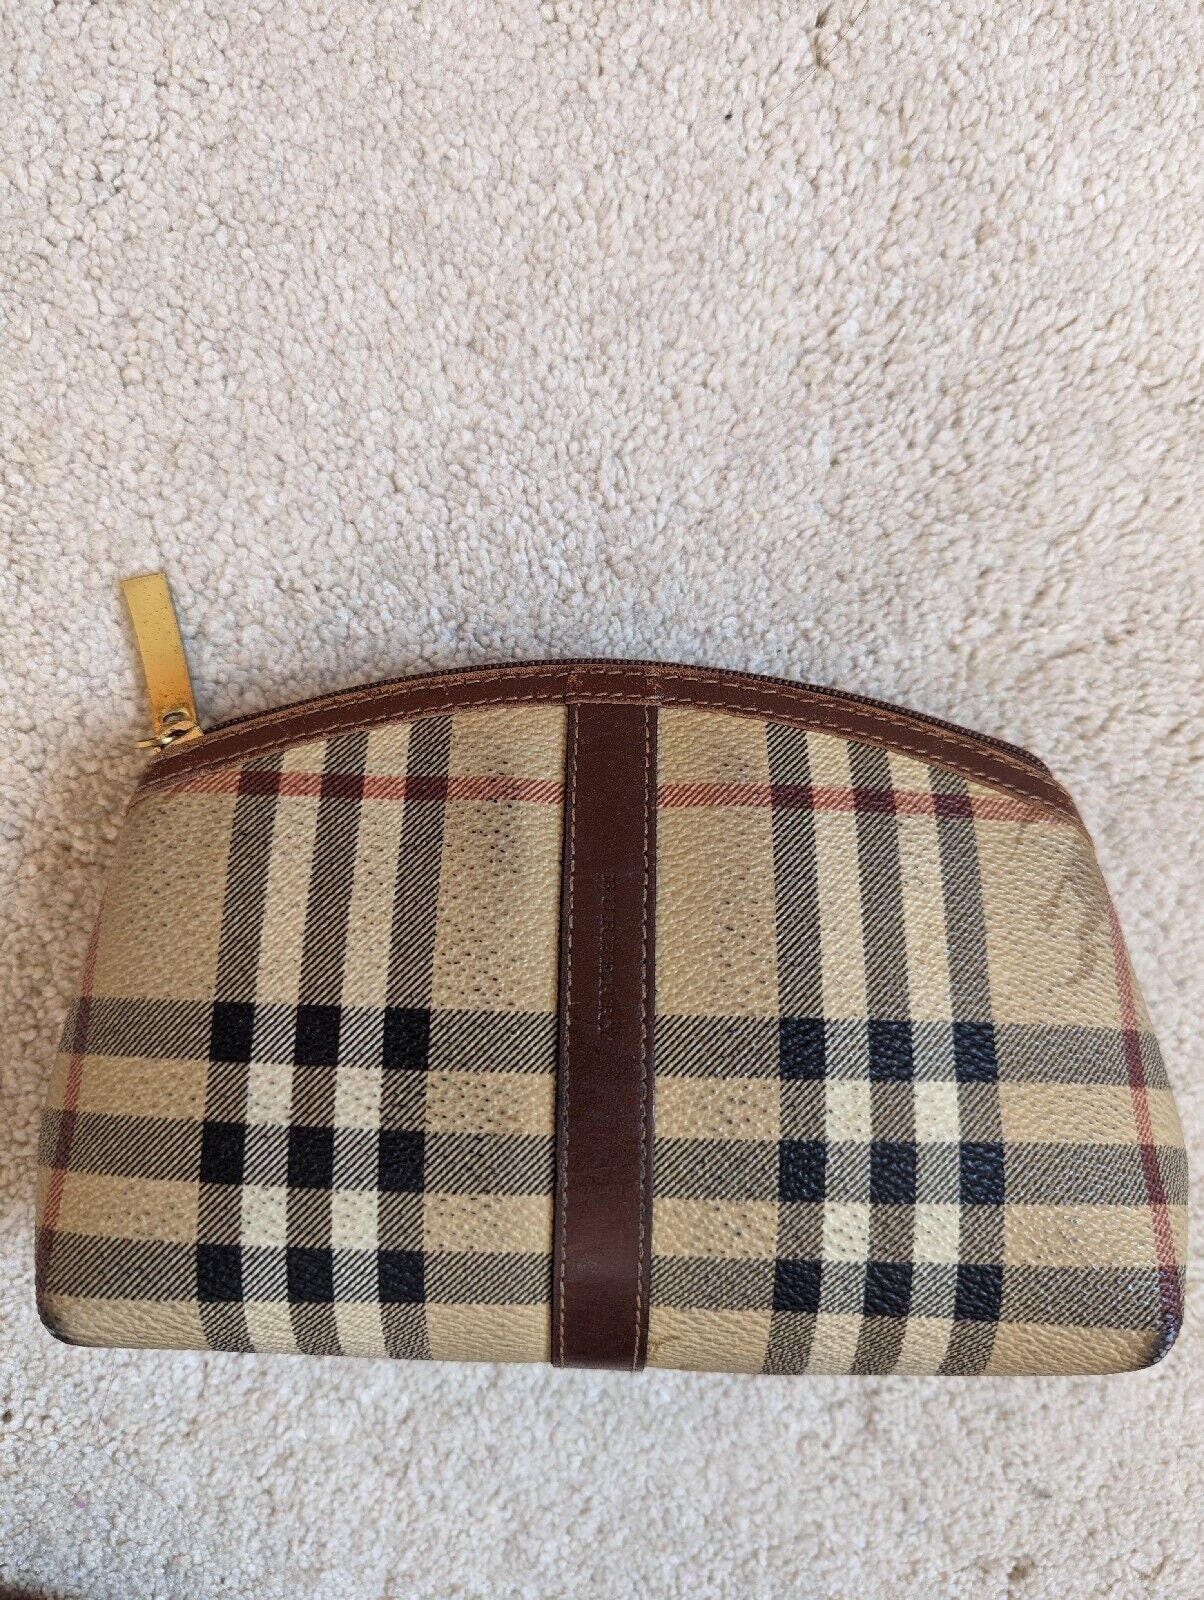 Burberry Large Metallic Gold Travel Toiletry Makeup Bag Pouch with Gift Box  